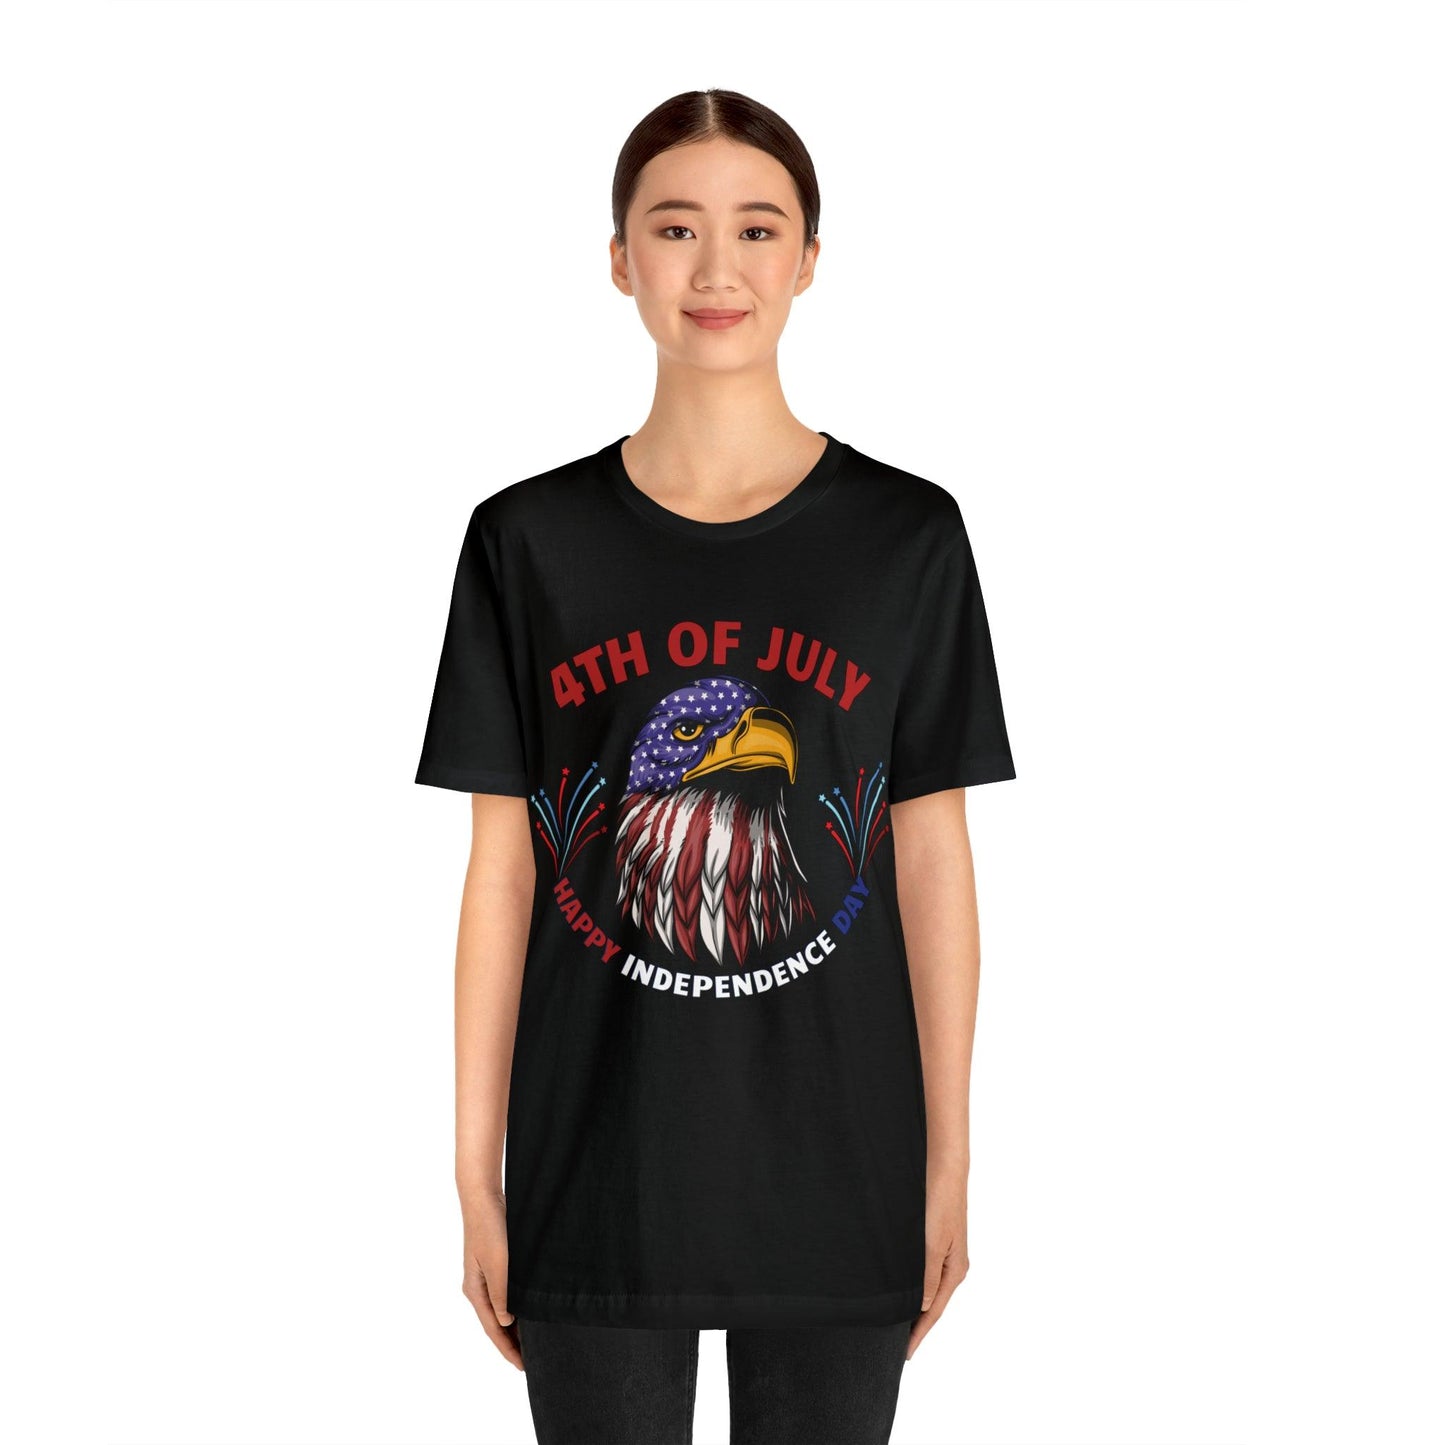 4th of July shirt, Happy Independence Day shirt, Casual Top Tee